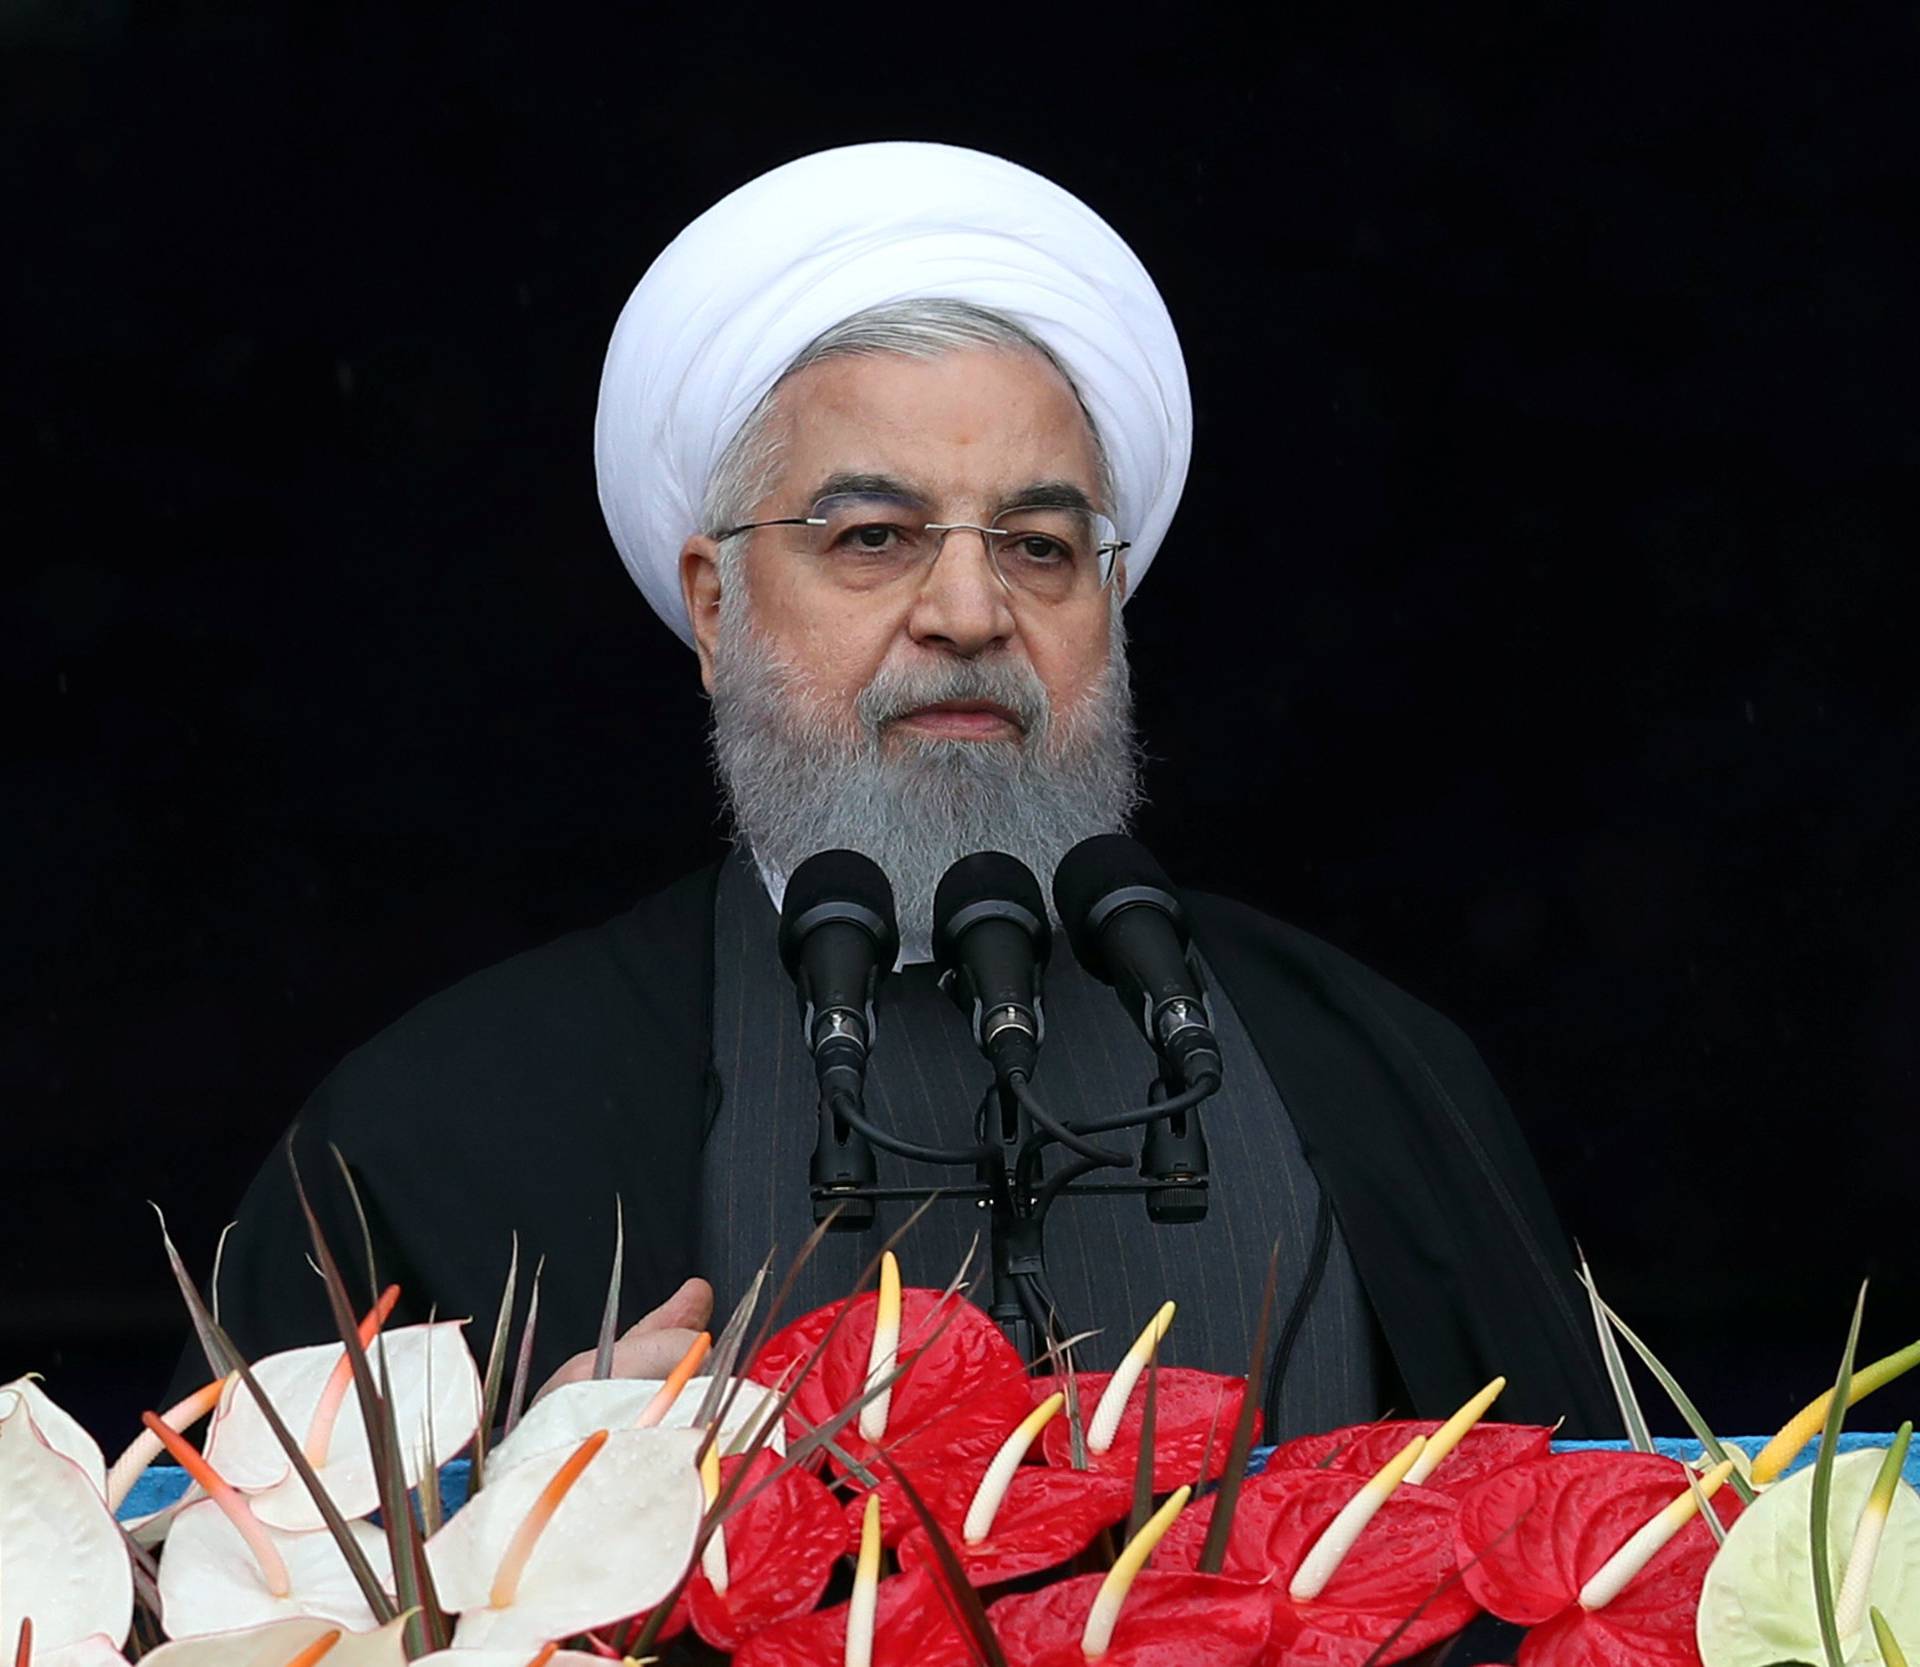 Iran's President Hassan Rouhani speaks during a ceremony to mark the 40th anniversary of the Islamic Revolution in Tehran